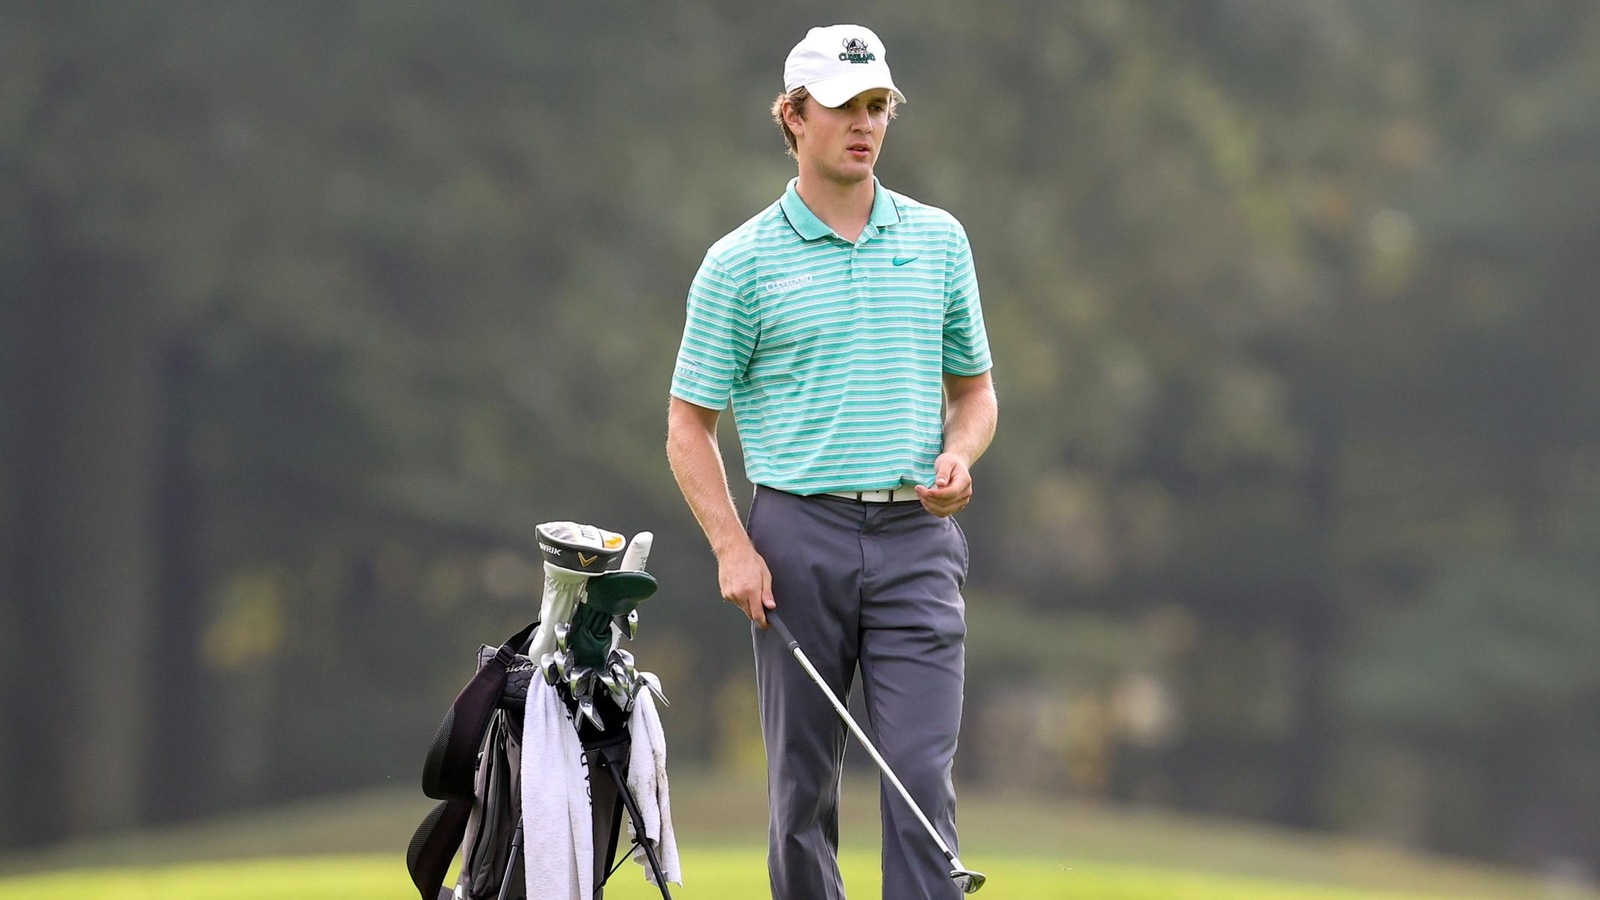 Cleveland State Men’s Golf in 16th Place after Two Rounds at ECU Intercollegiate